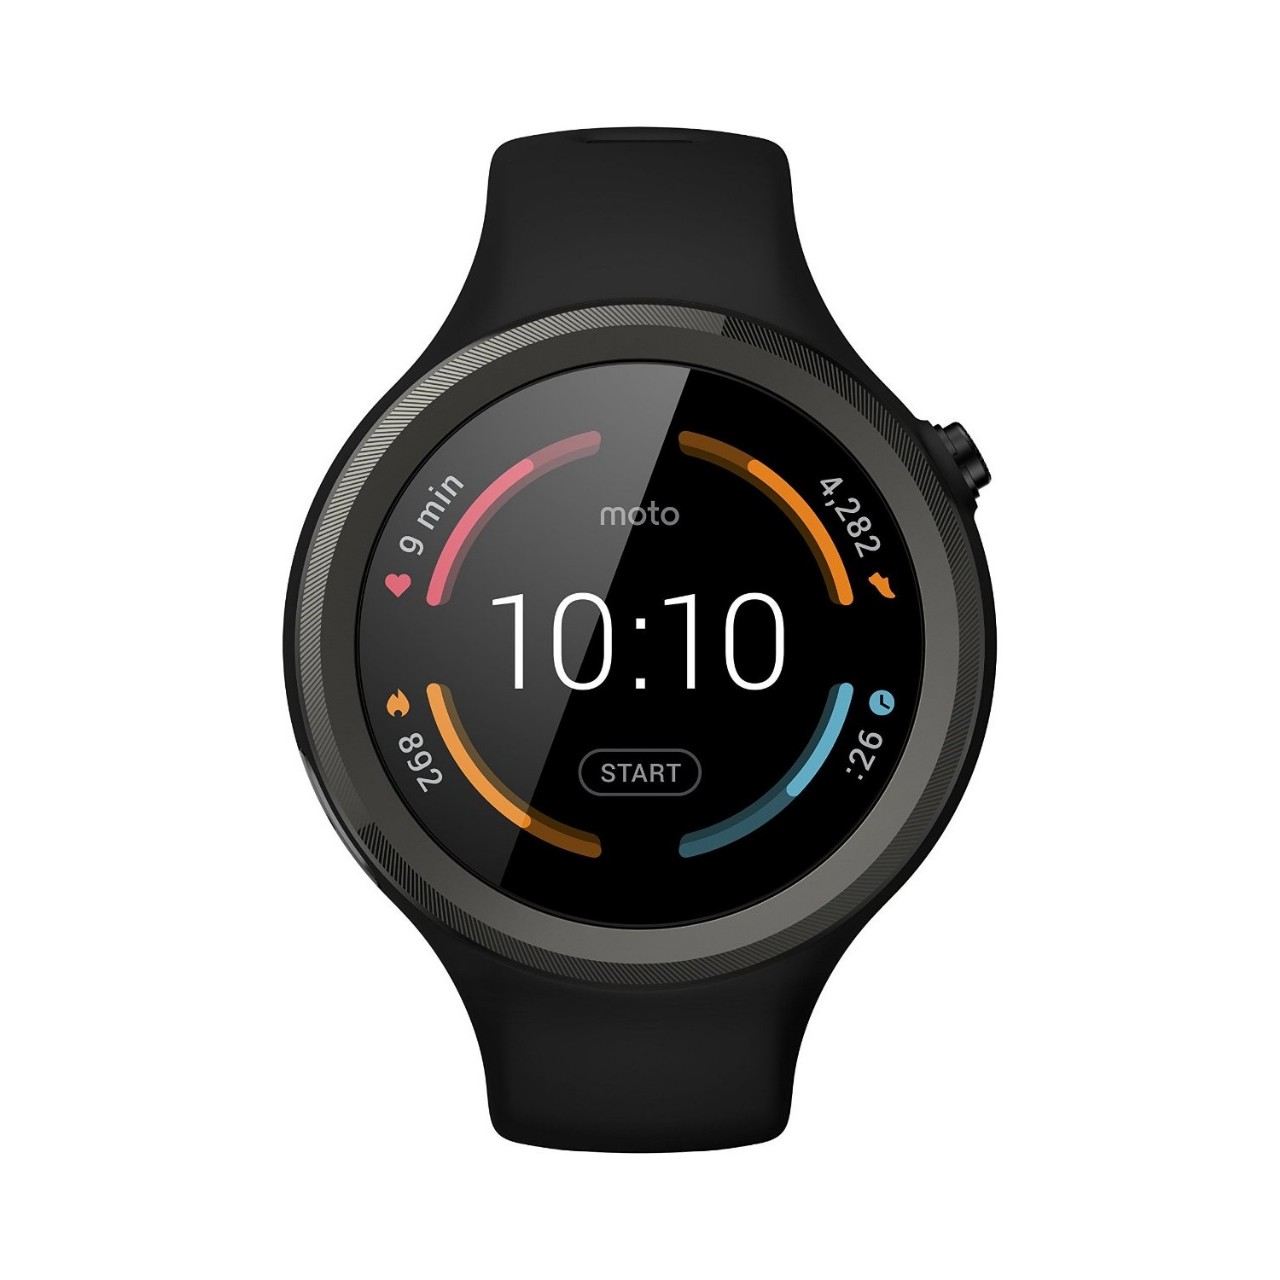 Here are the steps to set the date and time on the Motorola Moto 360 Sport